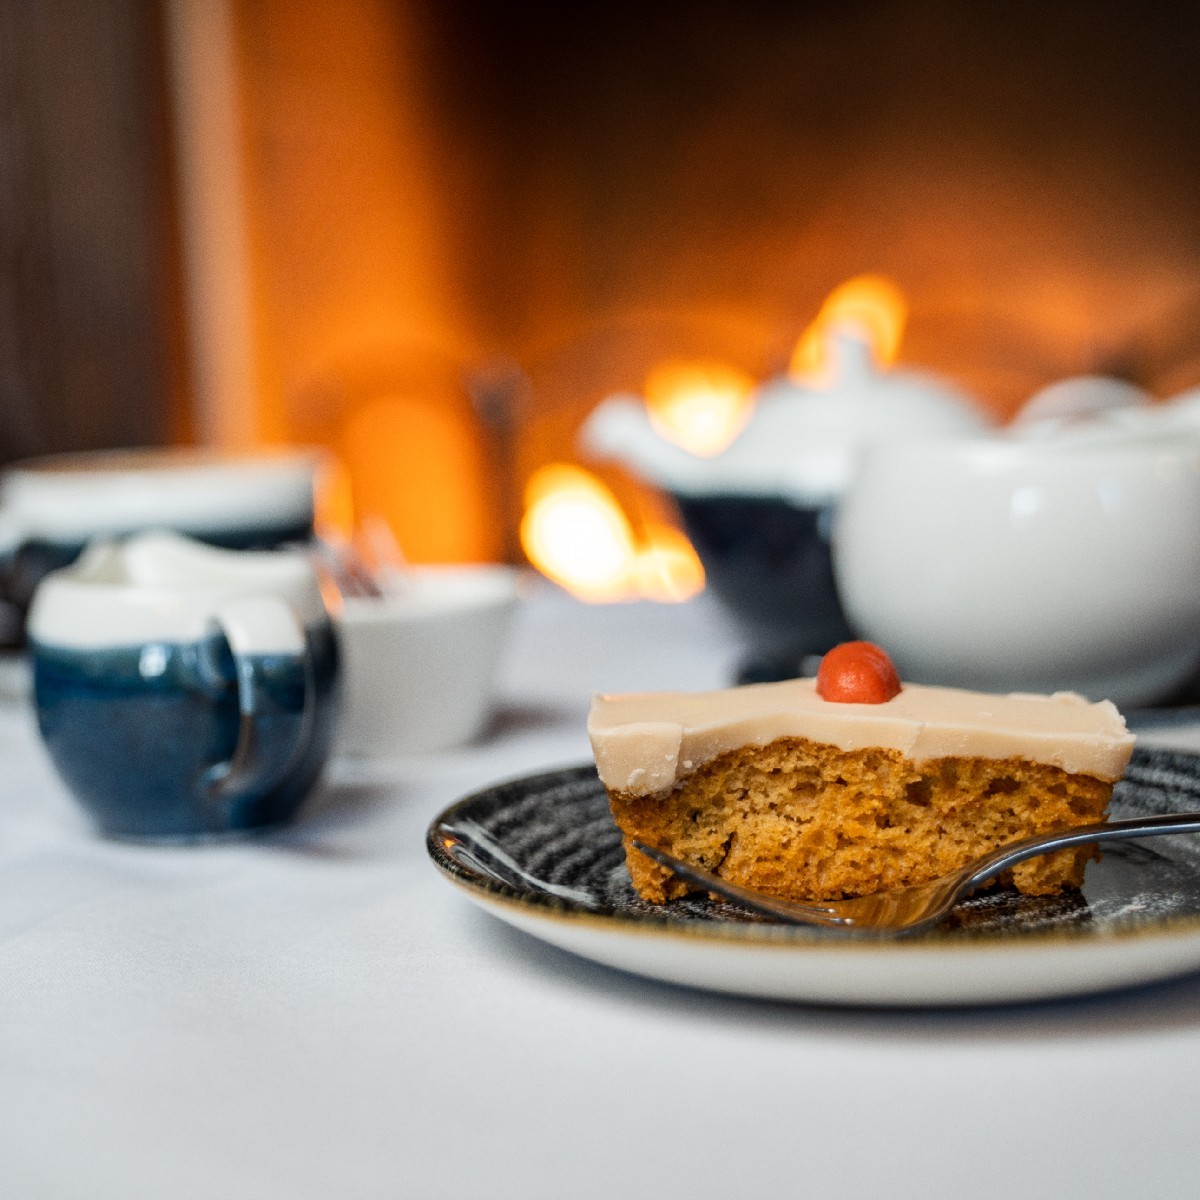 Who said Monday mornings have to be blue?

Join us every morning from 10 am for a cake and hot drink for just £6.☕️

Head to our website for more information about Stonehouse Court:
fal.cn/3z108

#StonehouseCourtHotel #GreenTourism #VisitStroud #CoffeeAndCake